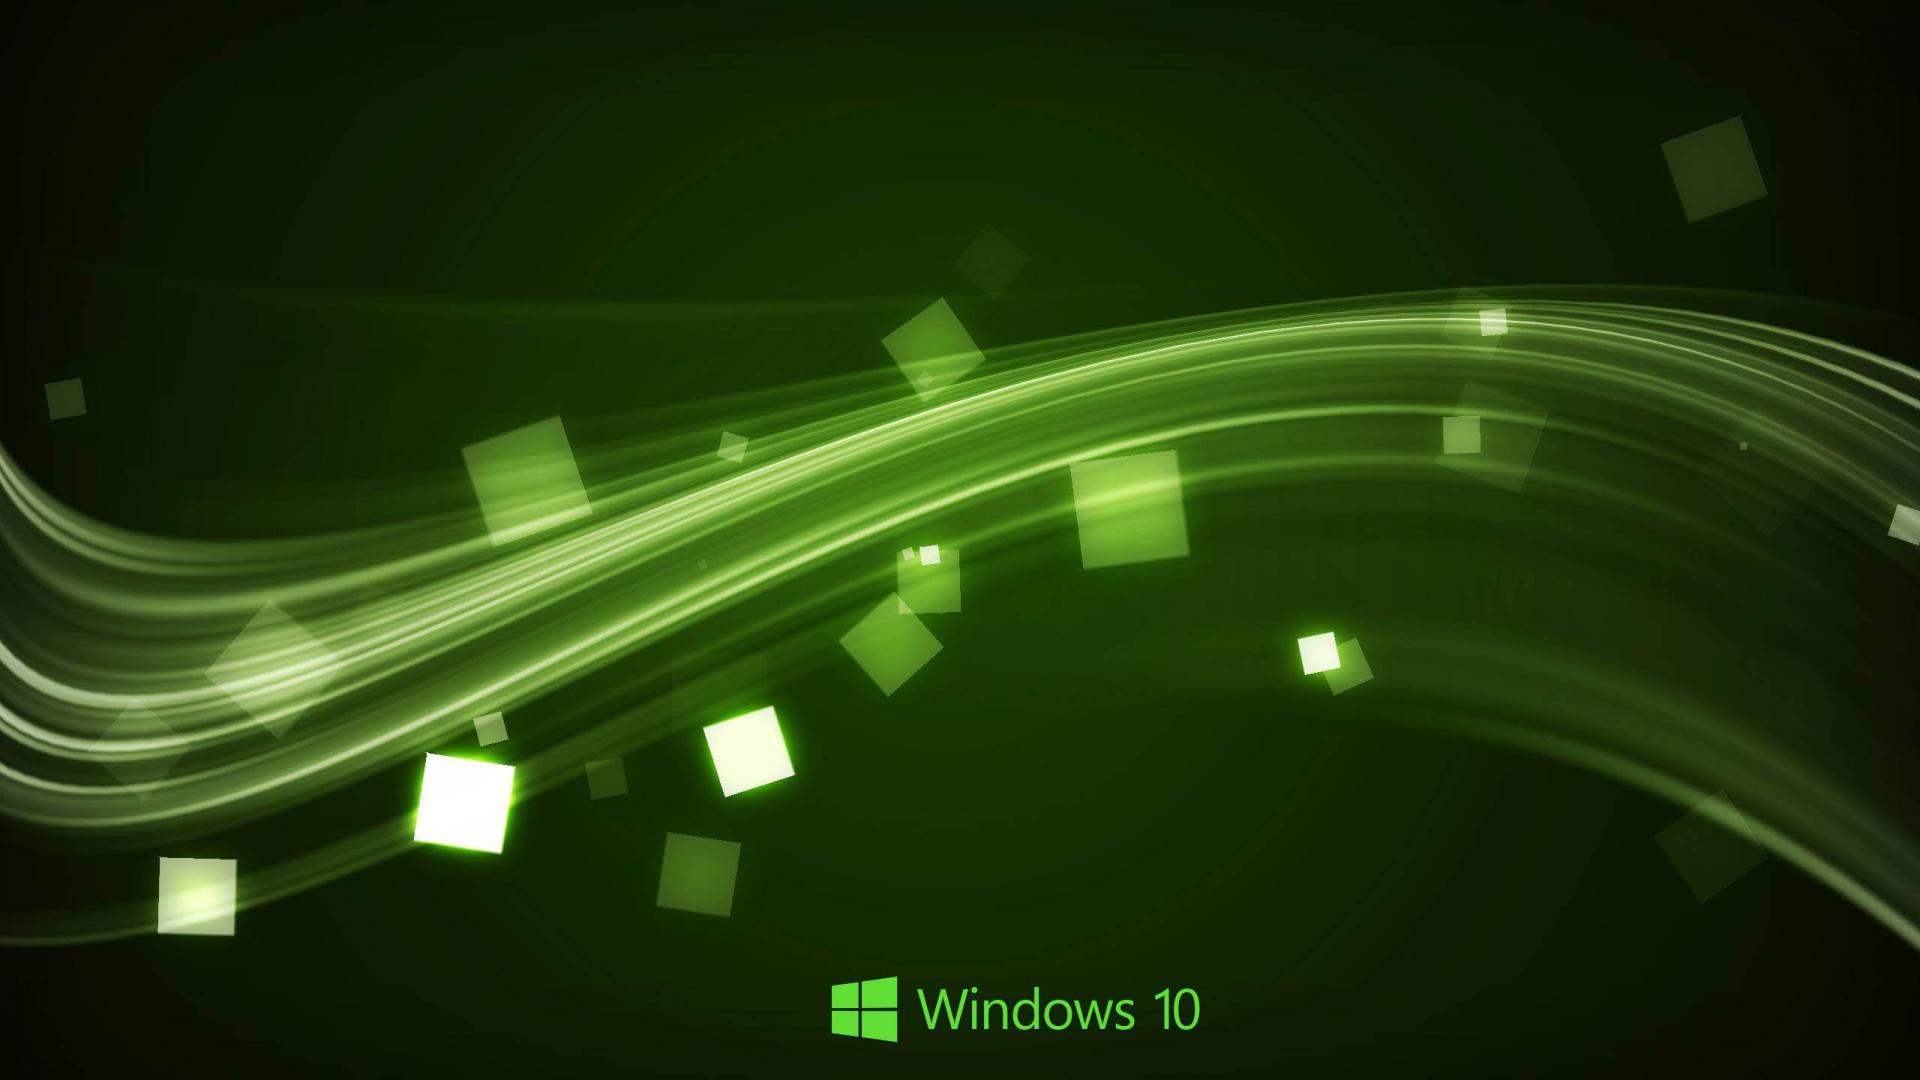 Windows Wallpaper in Abstract Green Waves HD Wallpapers for Free